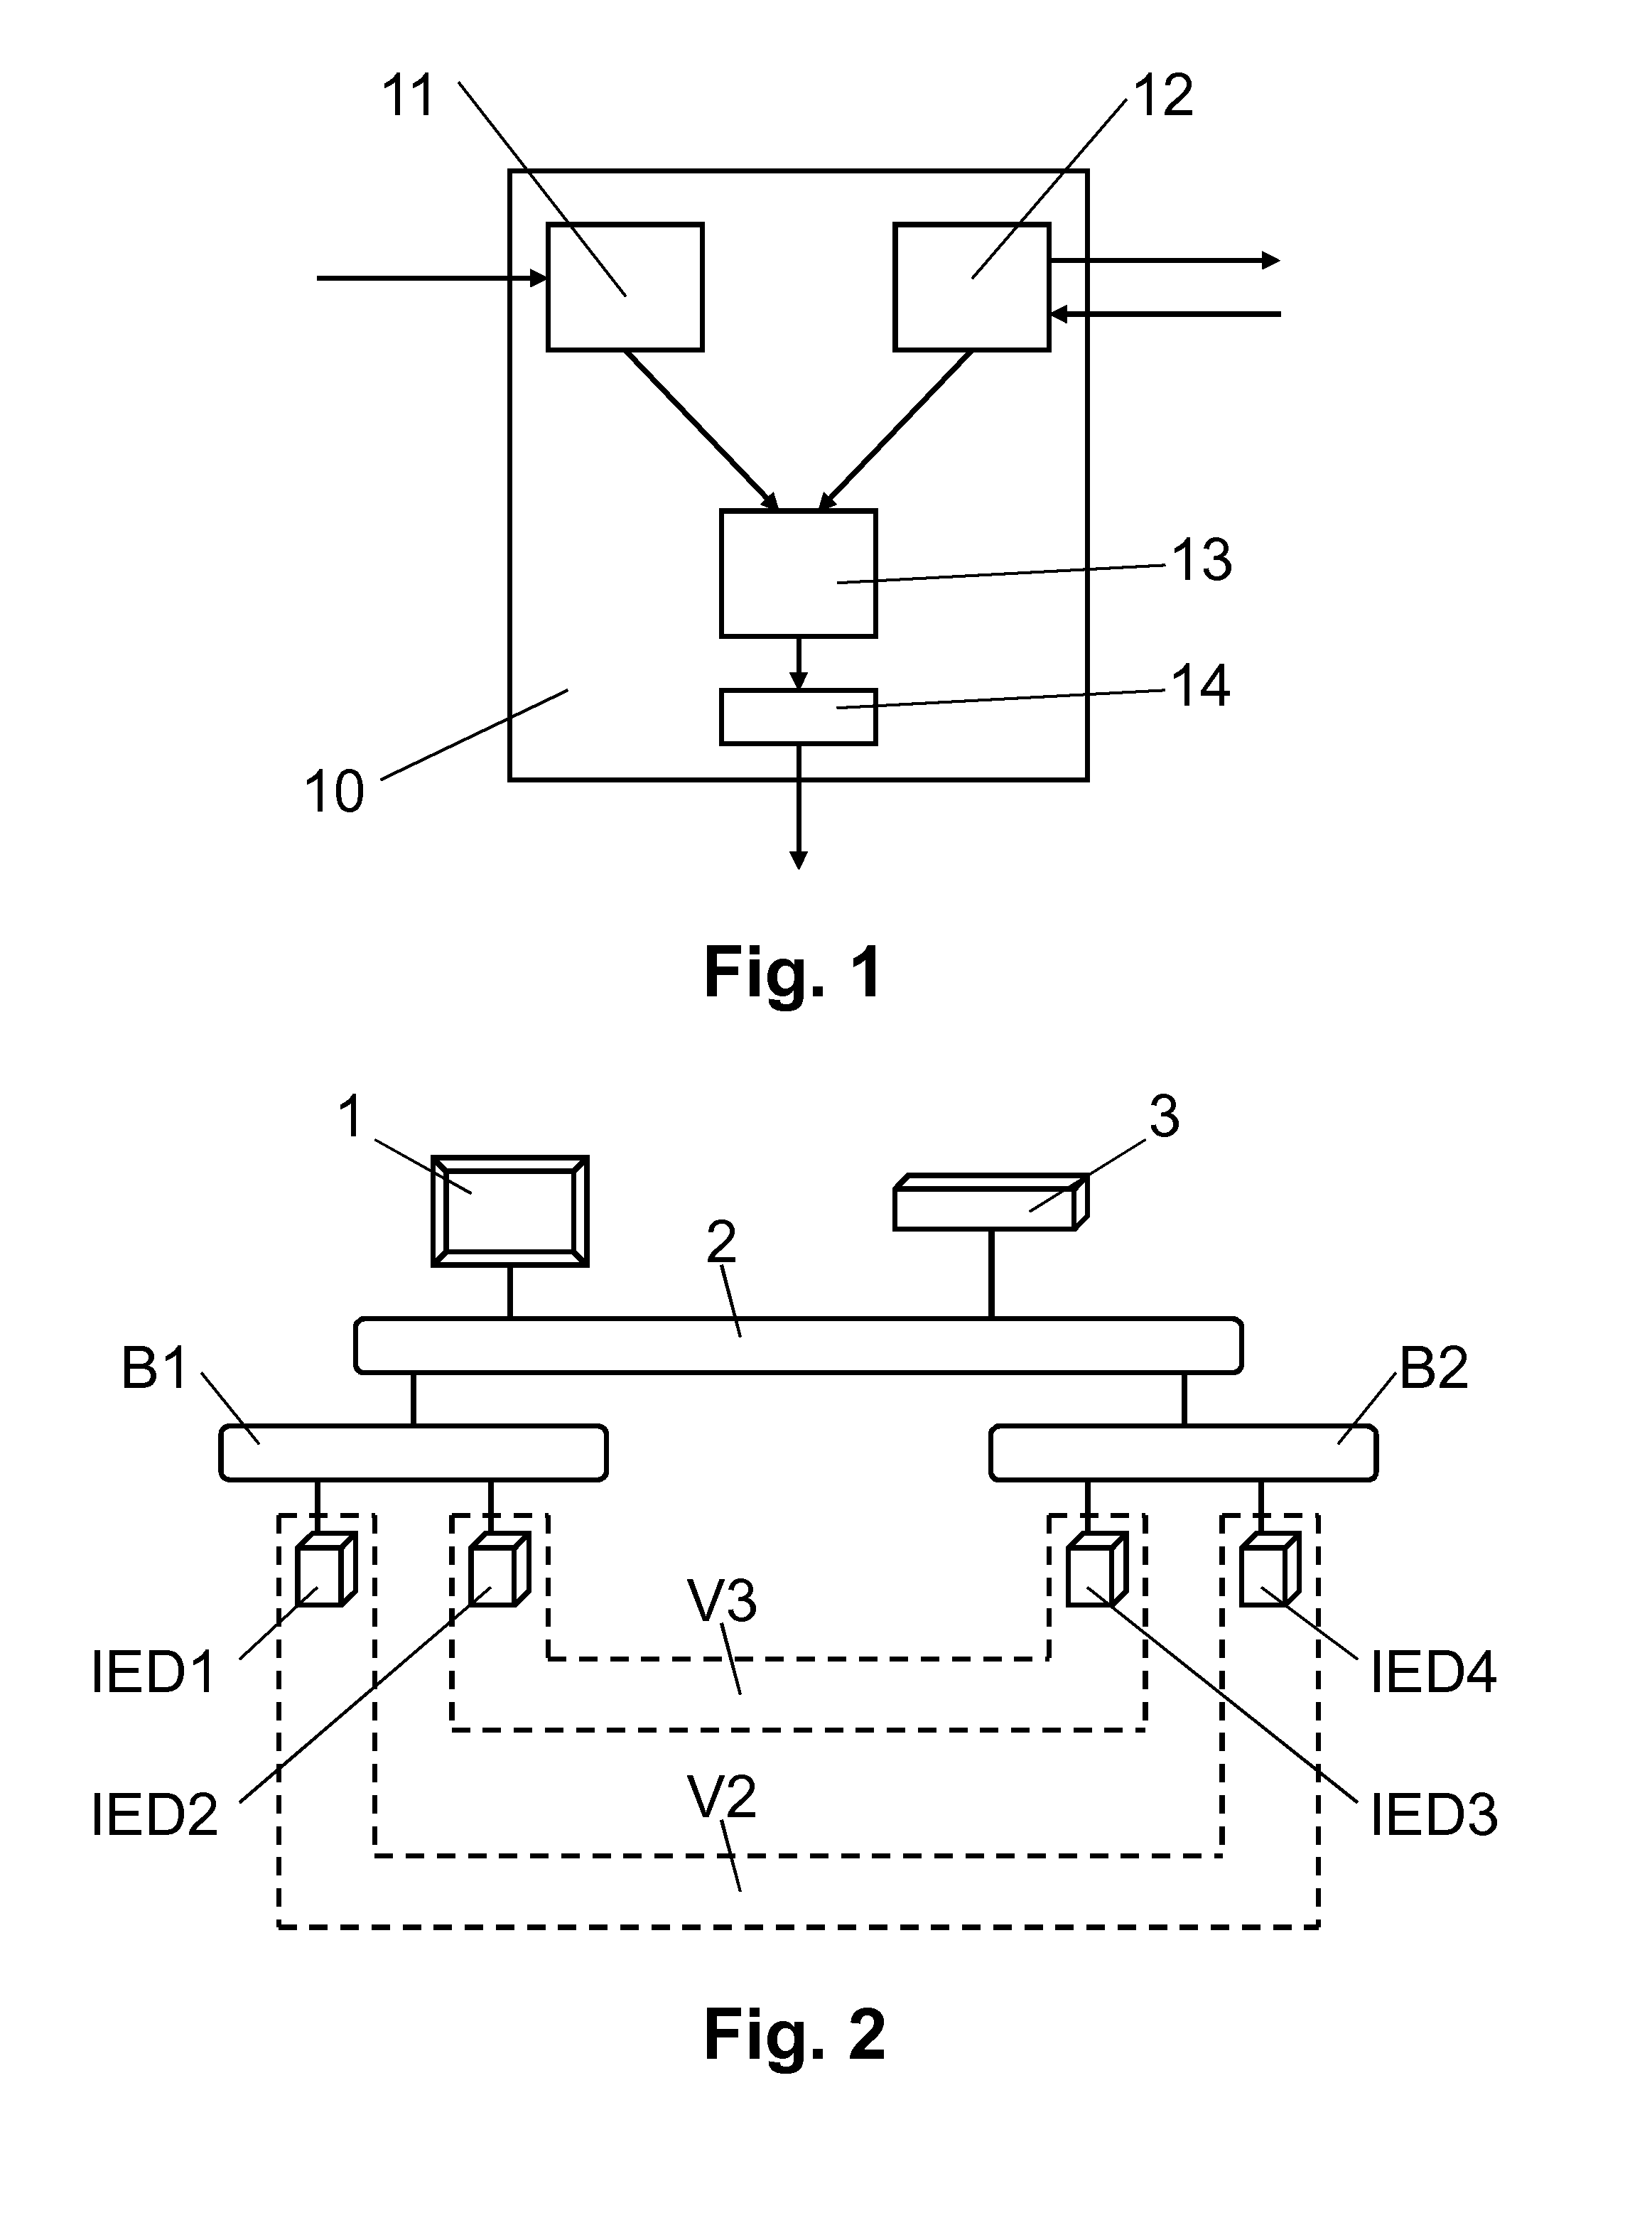 Validation of a communication network of an industrial automation and control system